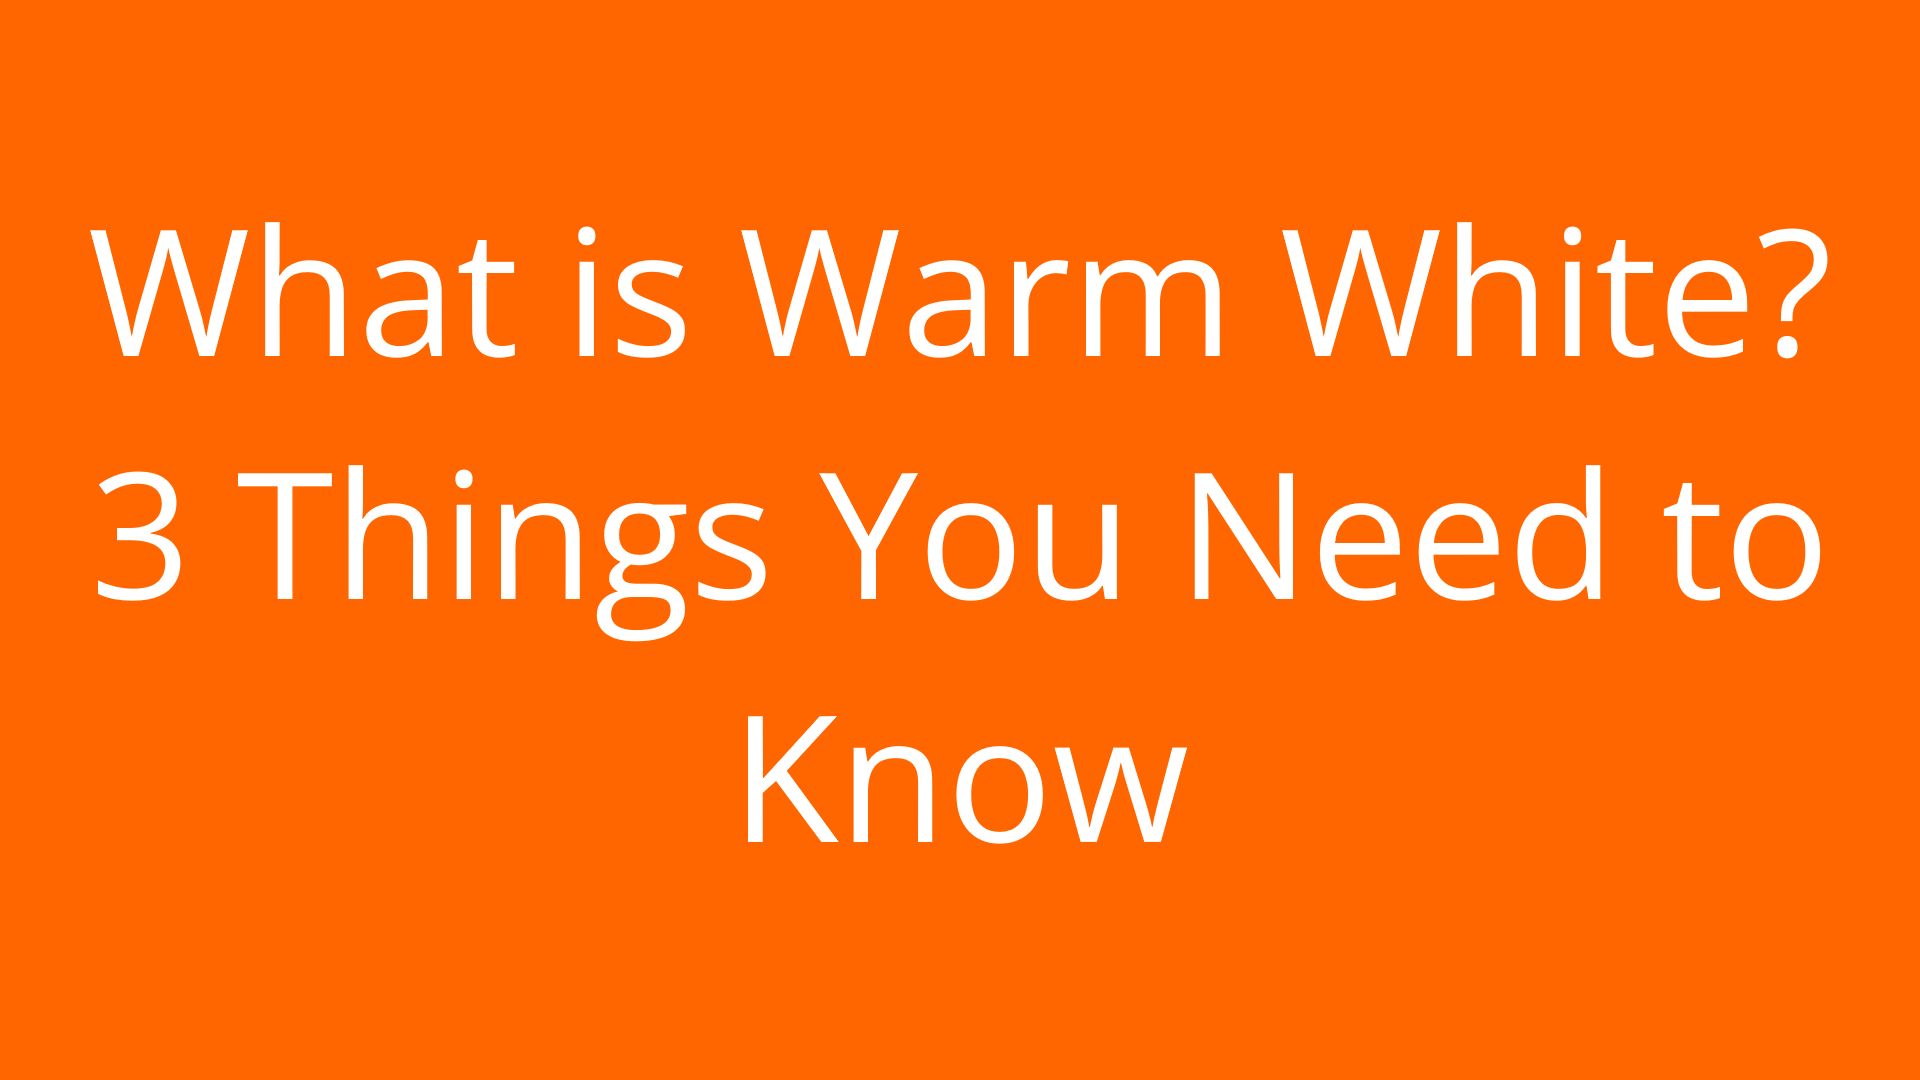 What is warm white? 3 Things You Need to Know